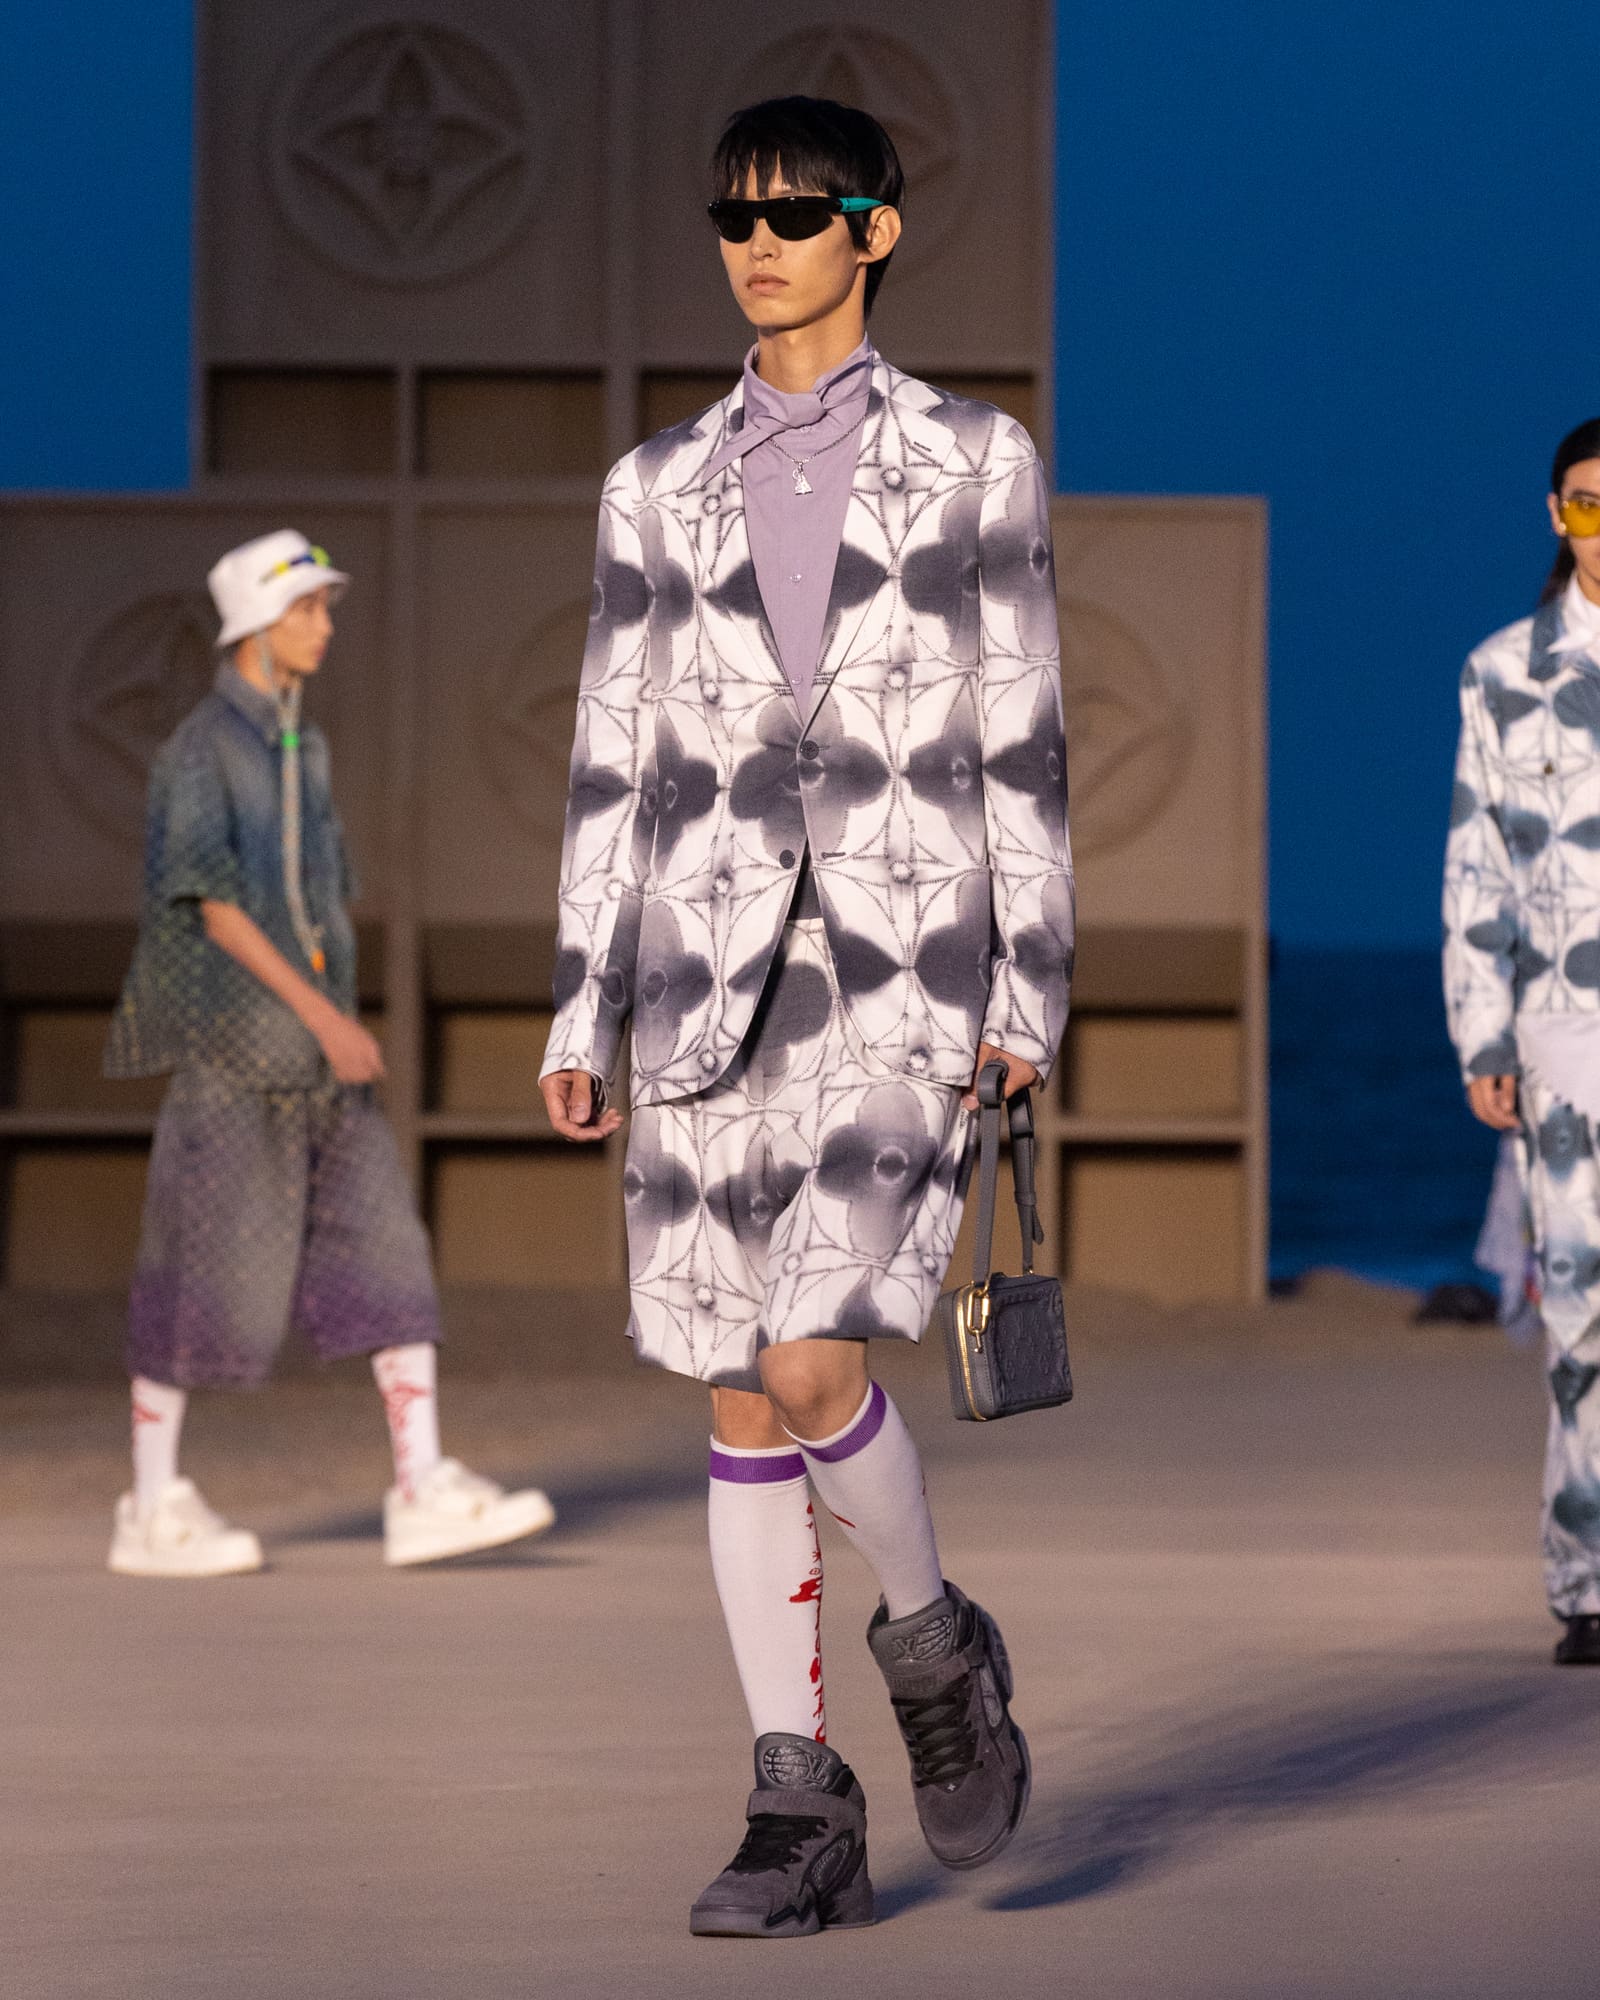 A look at all the elements at the Louis Vuitton Men's SS23 Spin